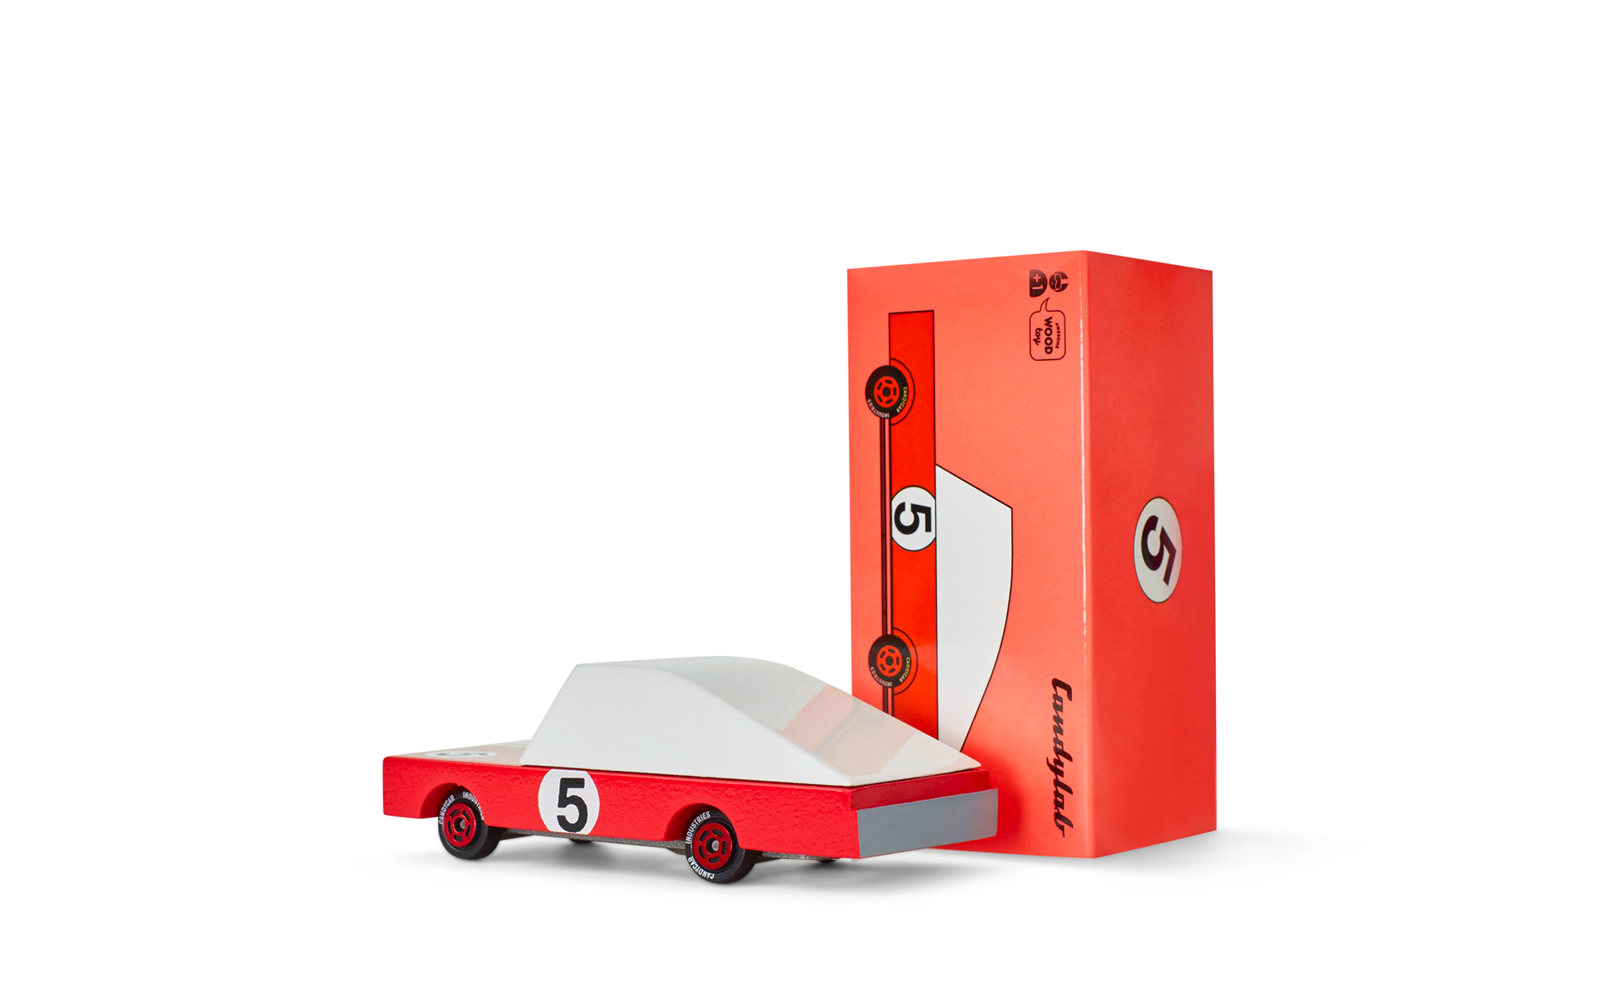 Red Racer classic toy car by Candylab Toys features solid beech wood and water-based paints. Made sustainably, made to last, made for fun.  Available at thread spun